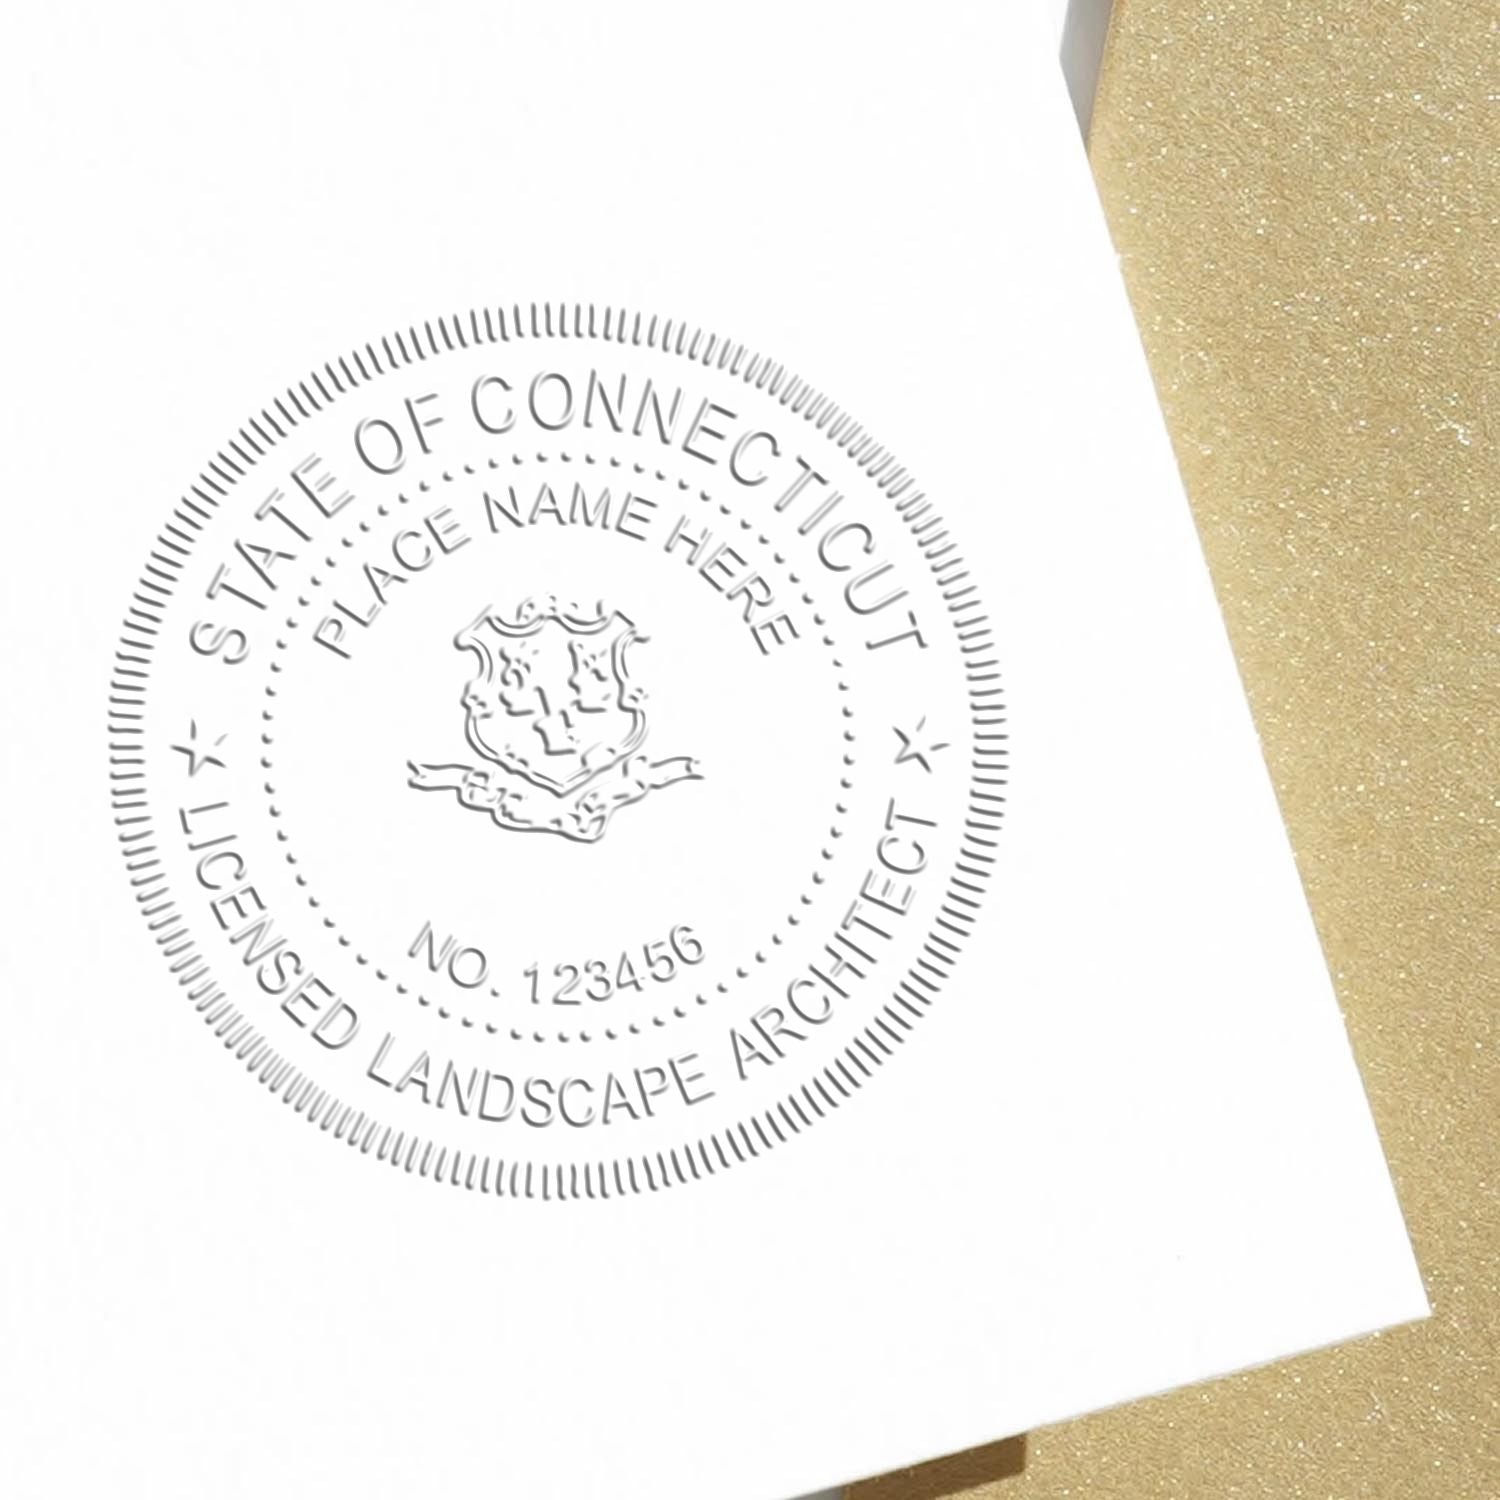 A photograph of the State of Connecticut Handheld Landscape Architect Seal stamp impression reveals a vivid, professional image of the on paper.